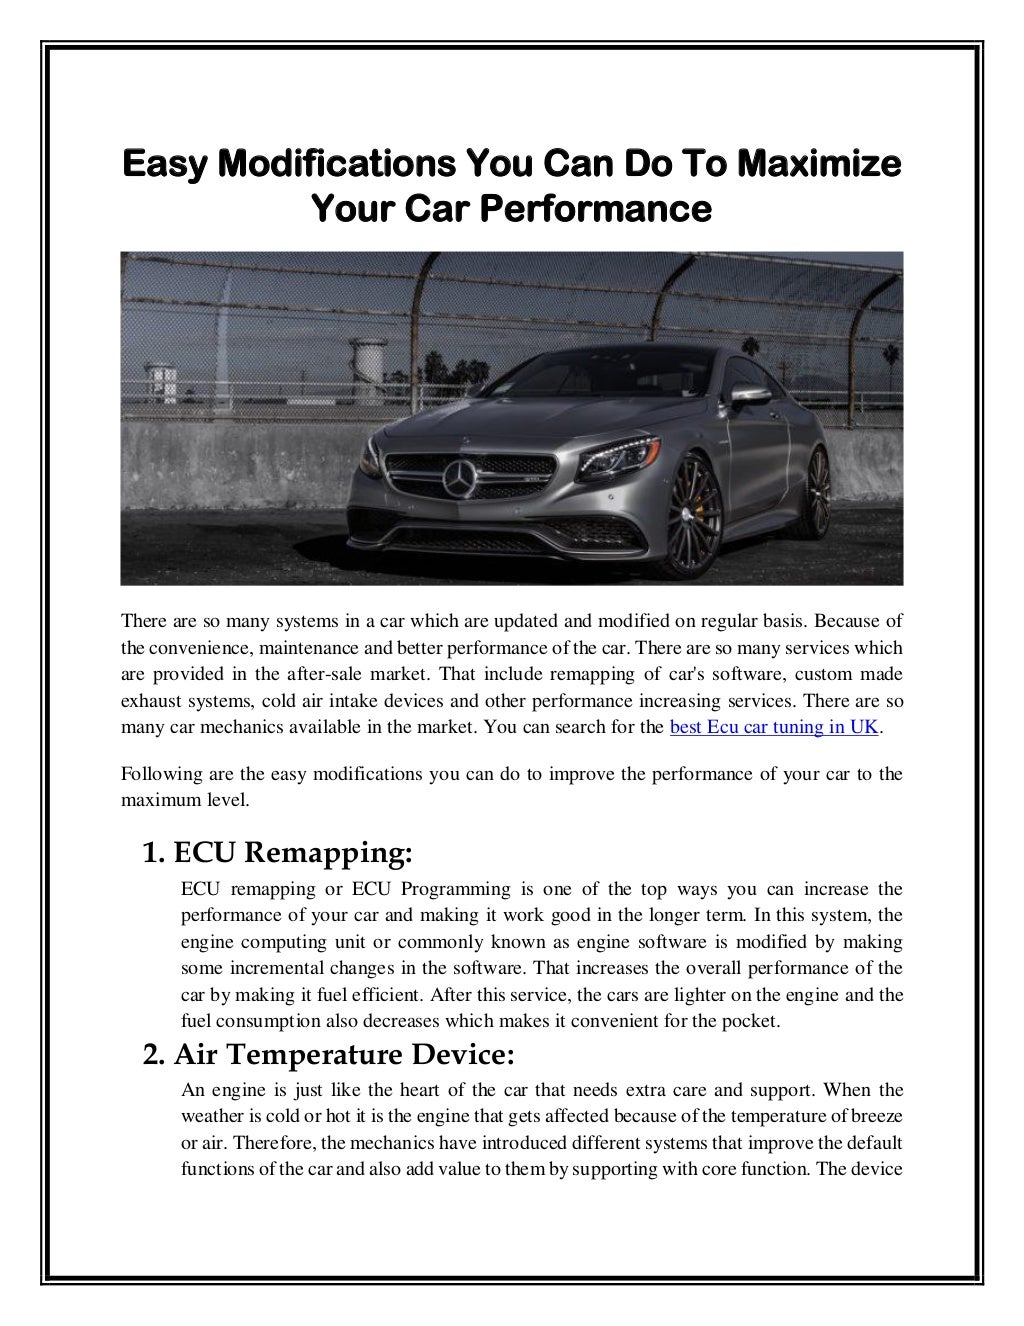 Easy modifications you can do to maximize your car performance